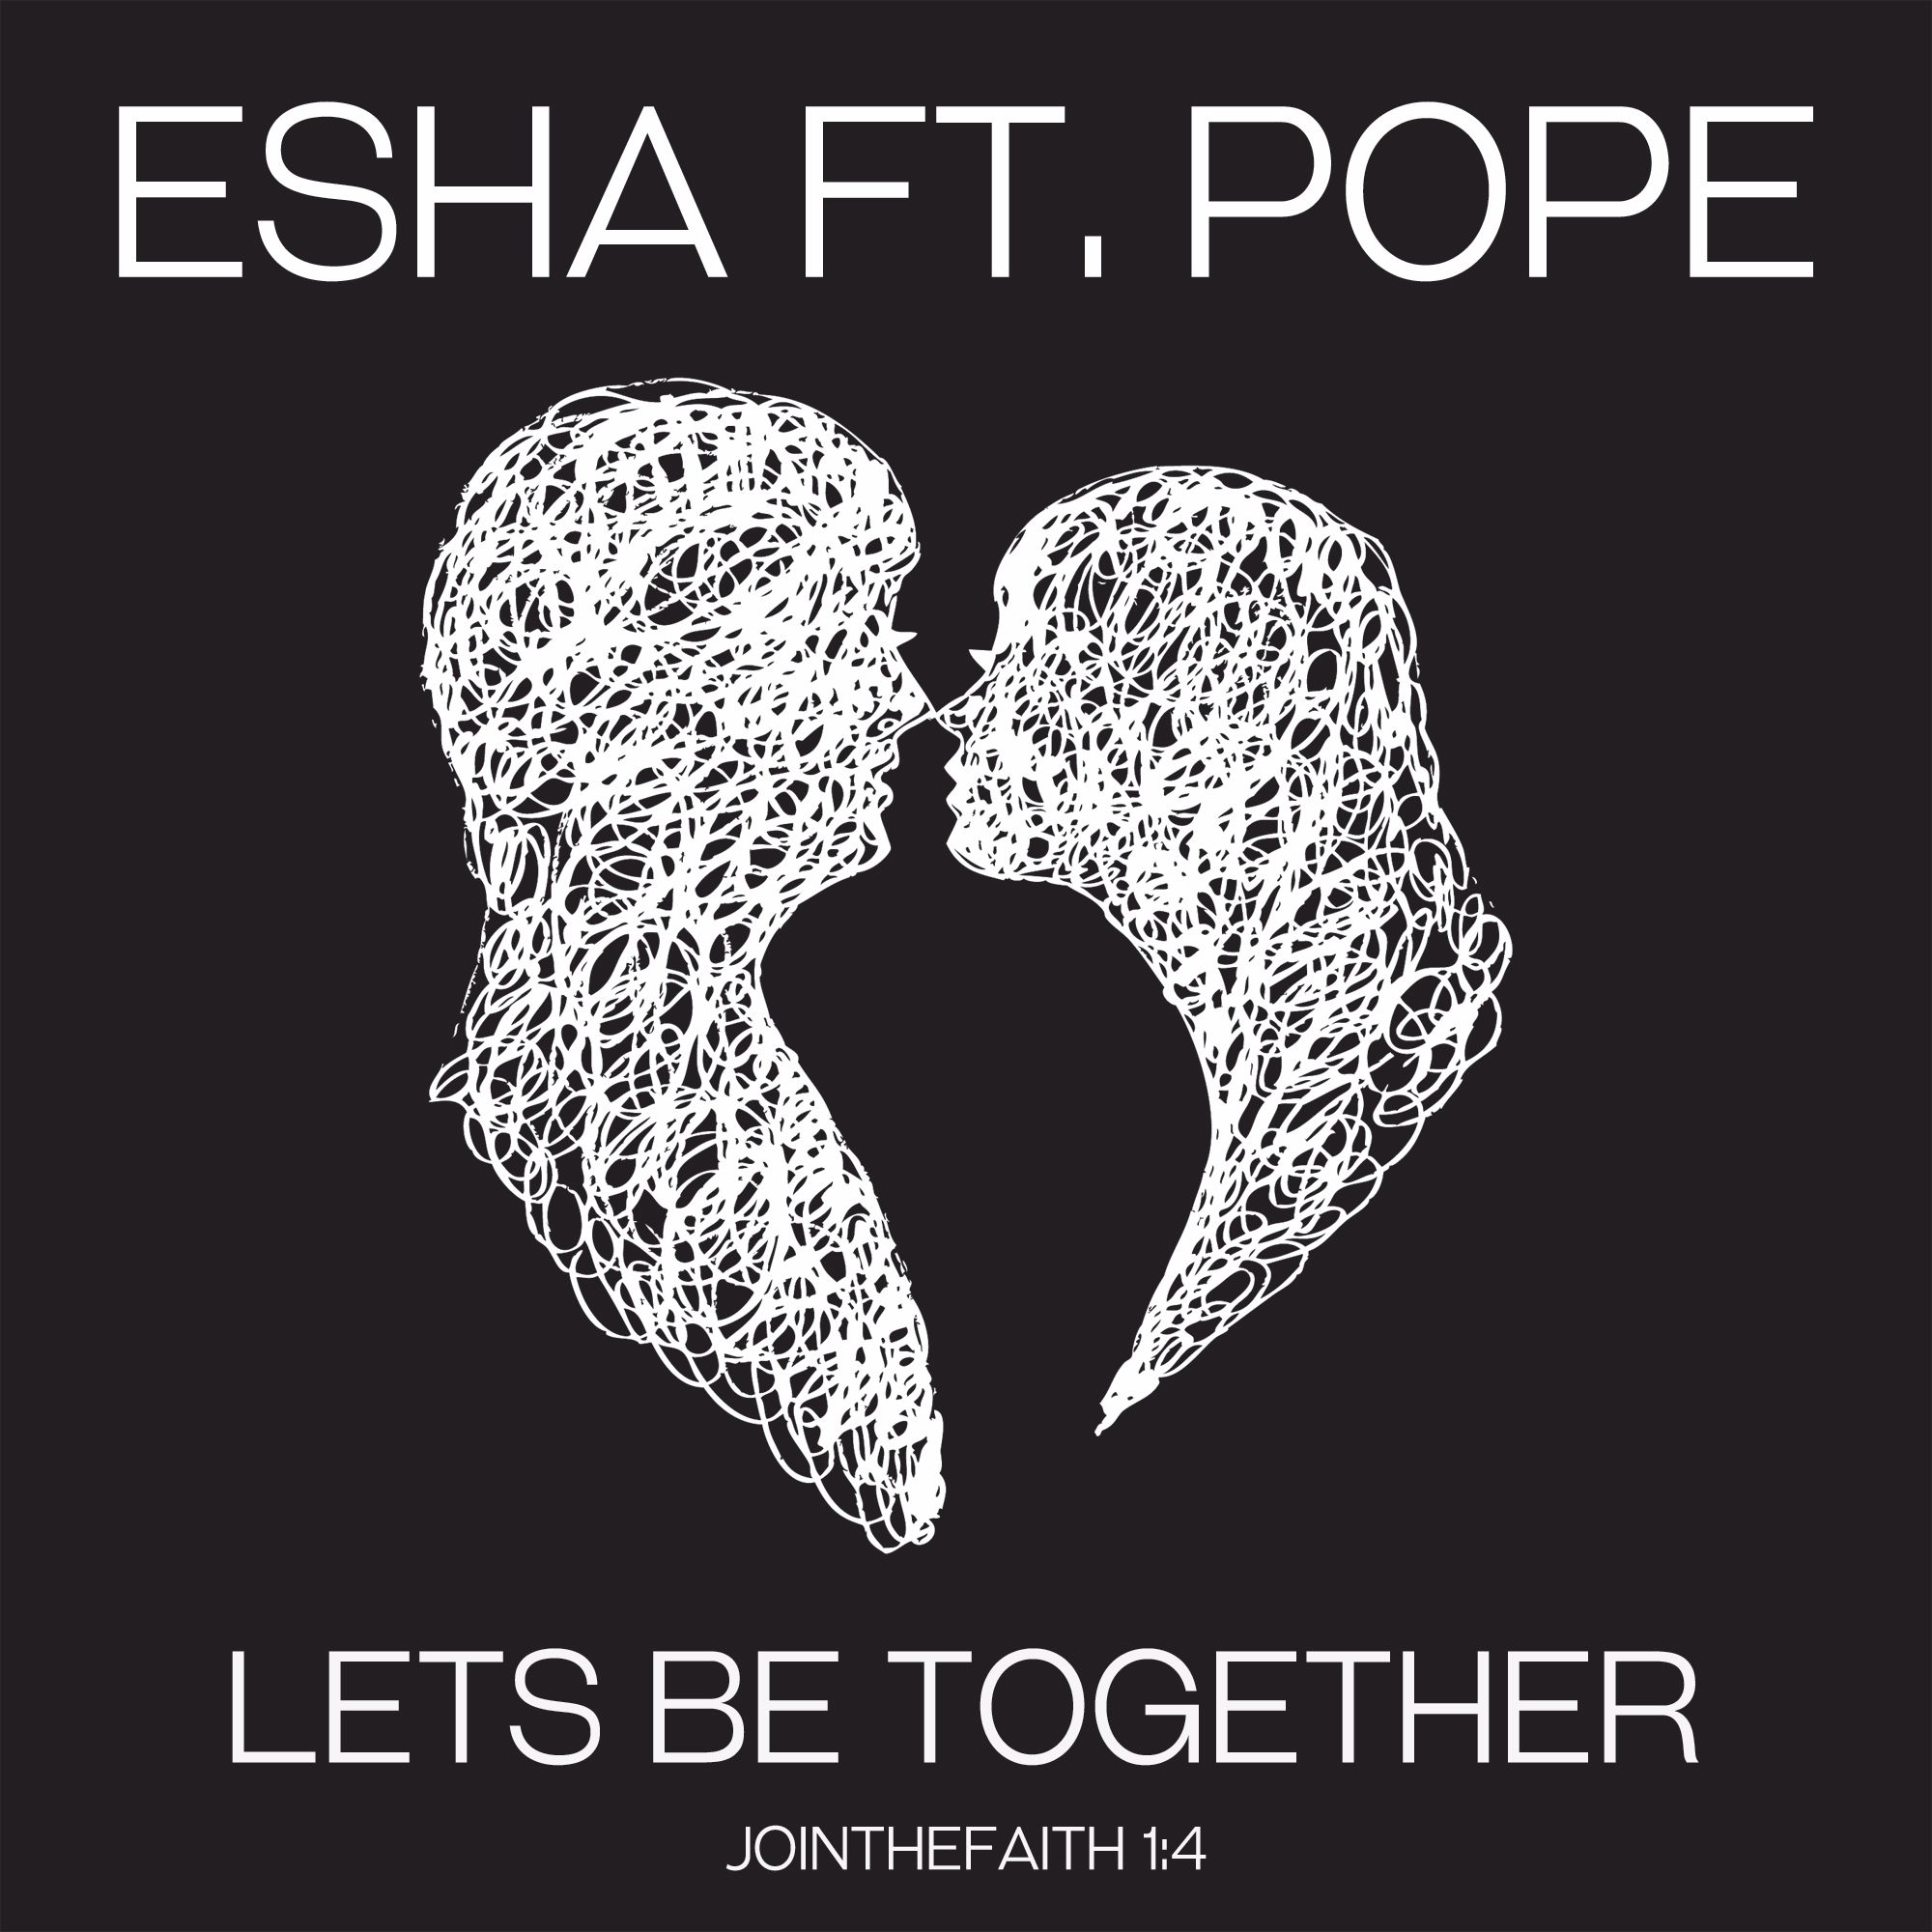 Hent Esha Ft. Pope - Lets Be Together (#jointhefaith 1:4)